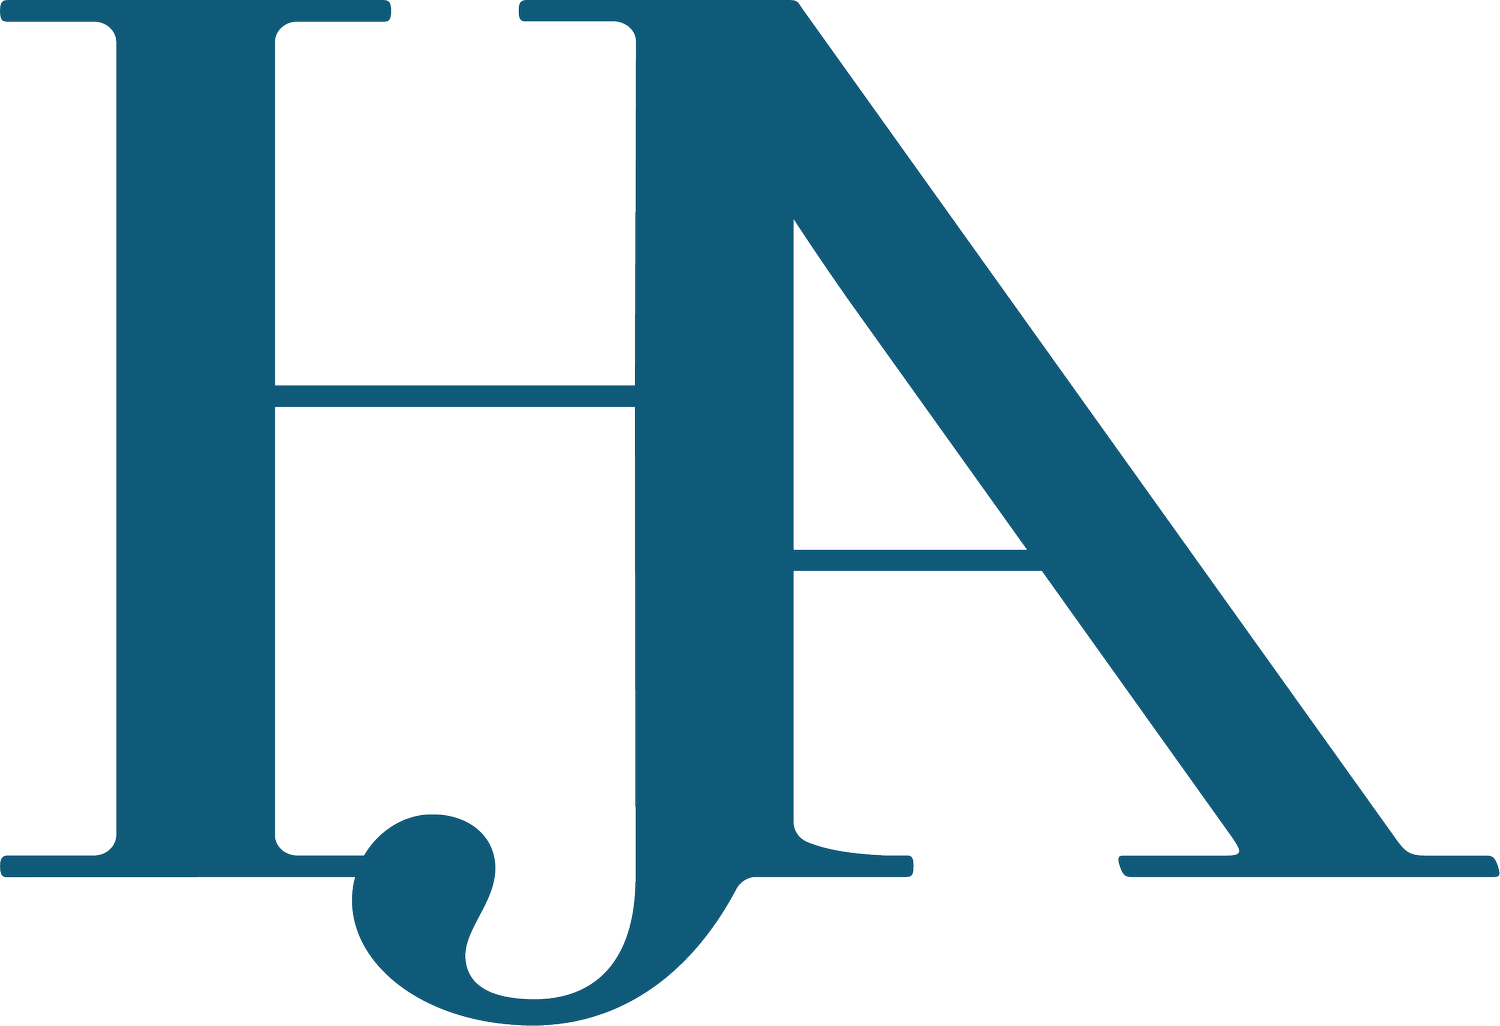 HJA: Commercial Advice, Procurement and Dispute Resolution